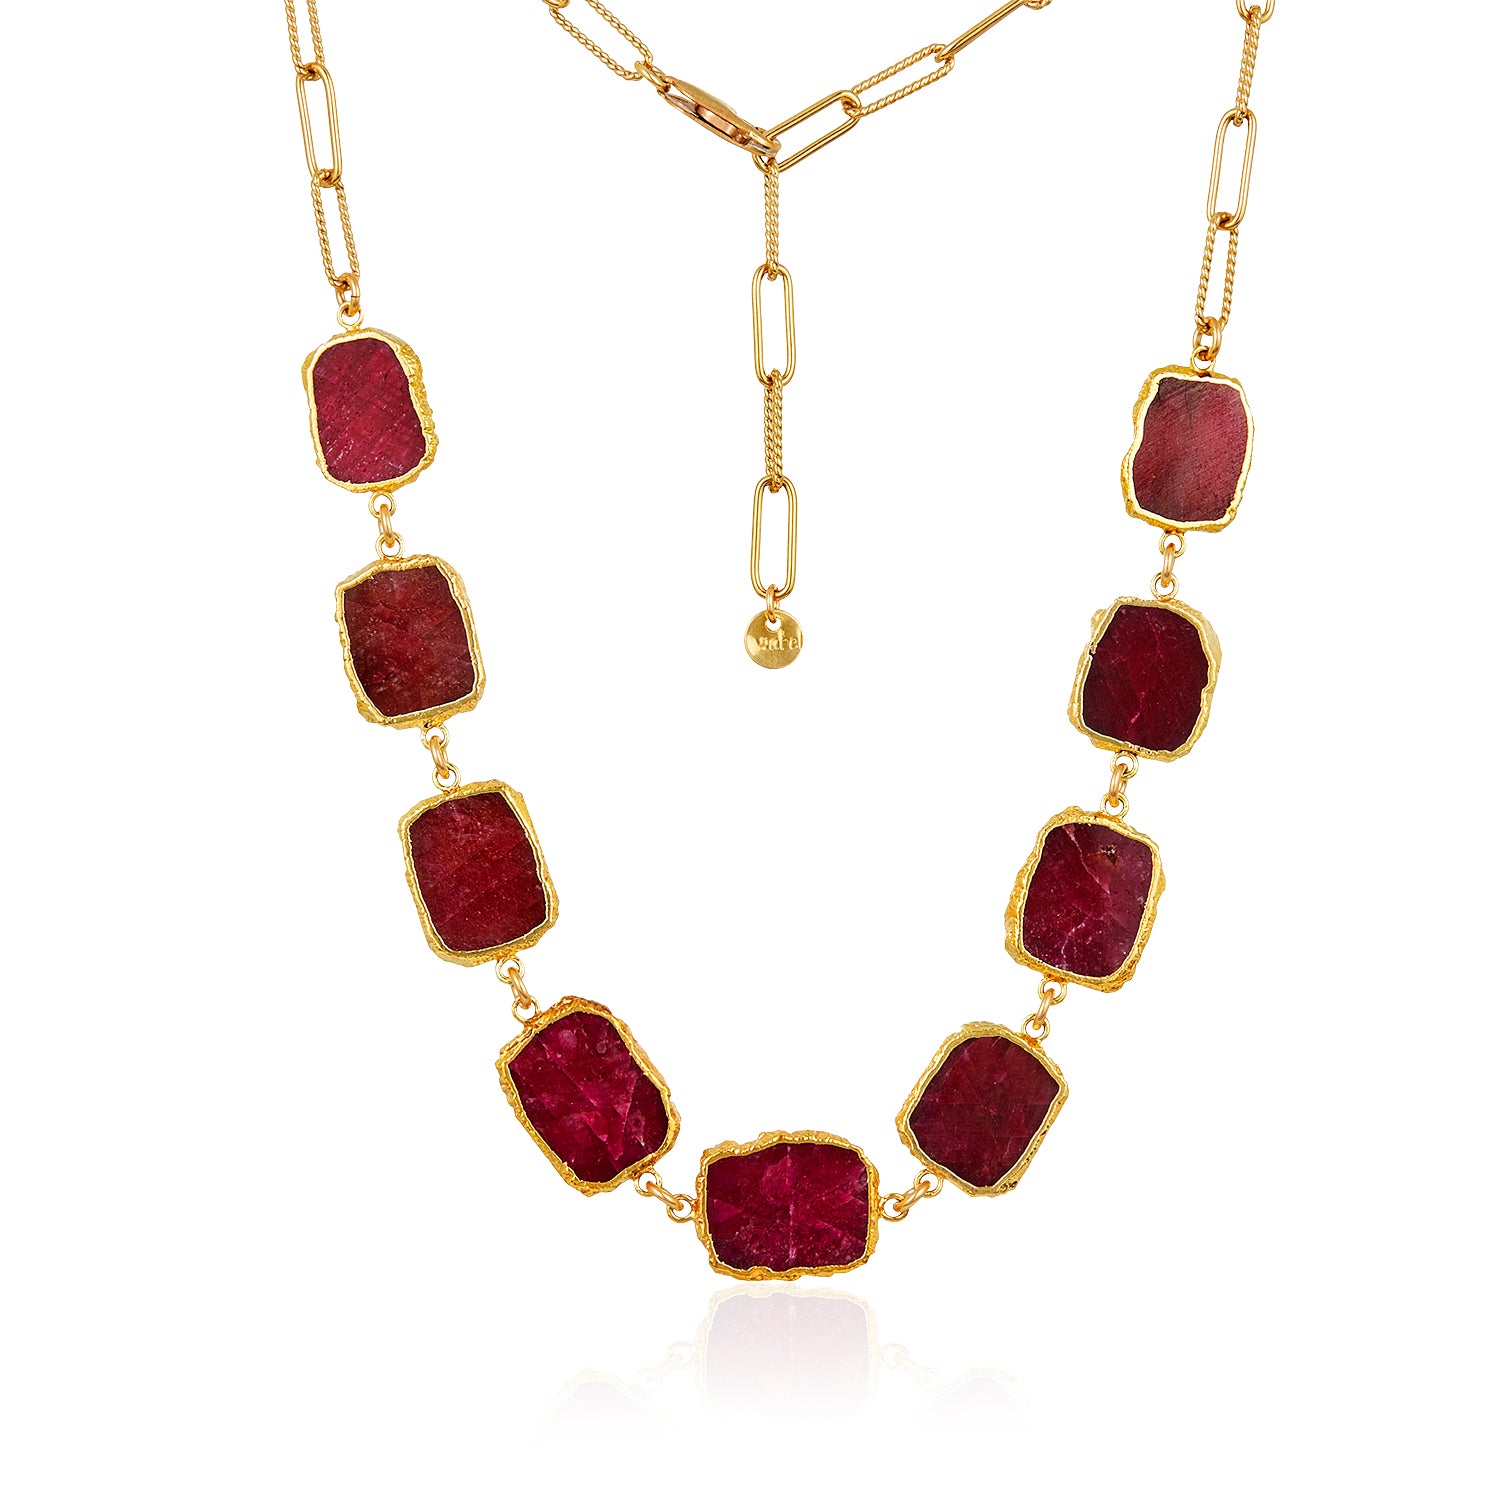 Links of Ruby Necklace